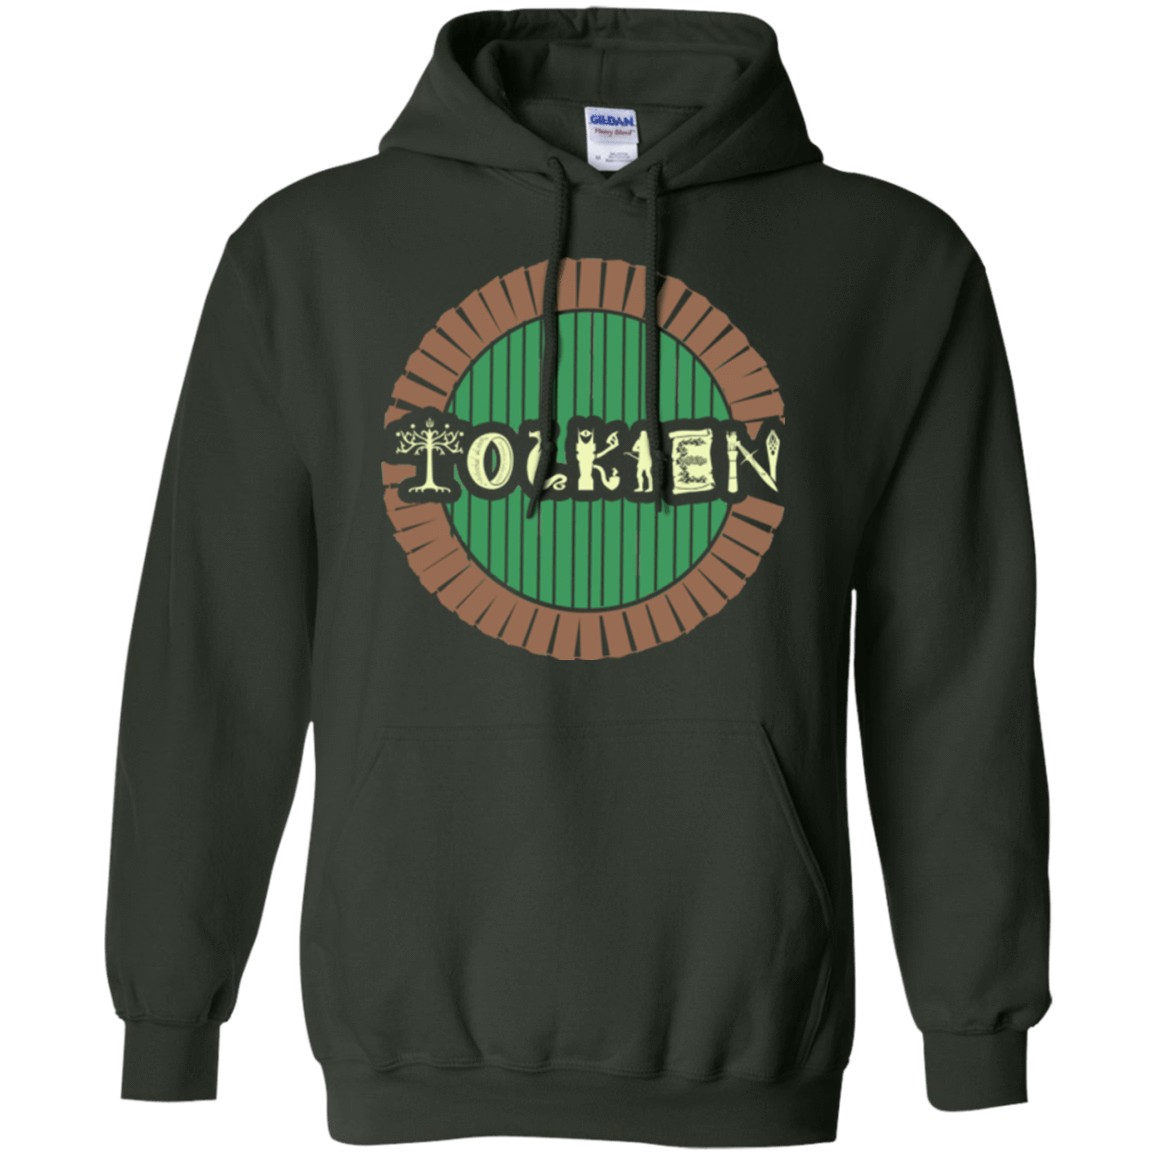 Sweatshirts Forest Green / Small A Single Dream Pullover Hoodie